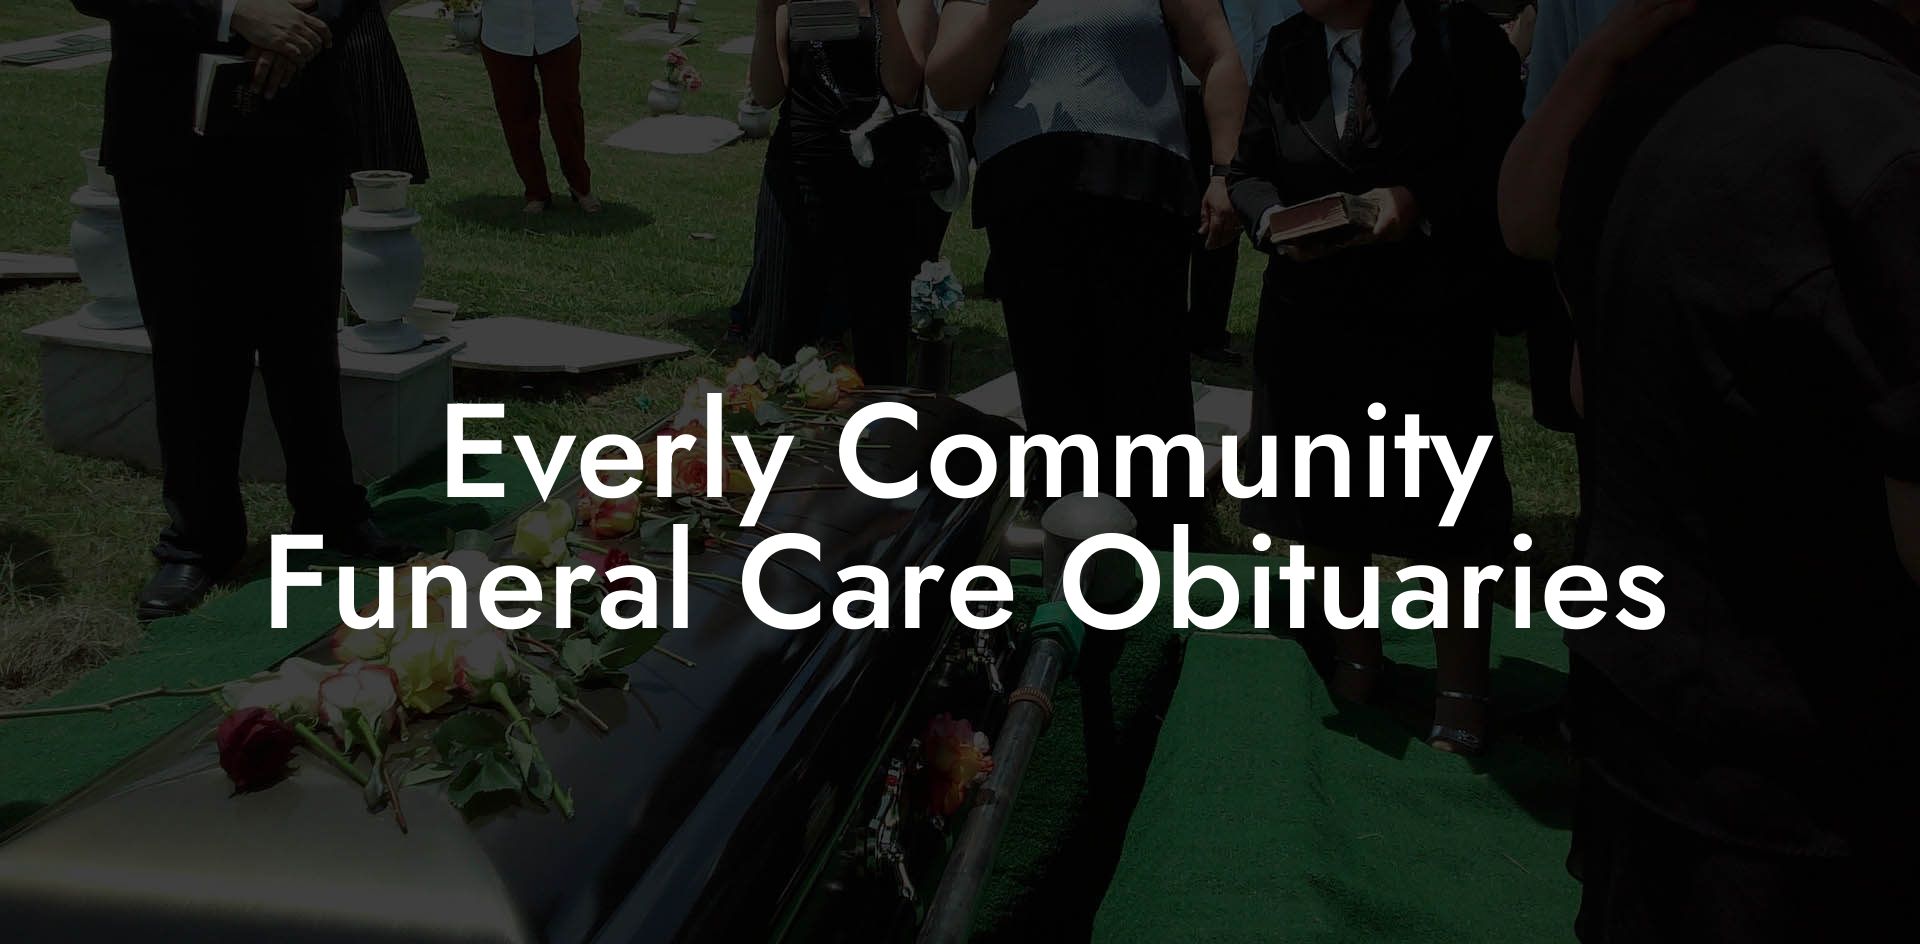 Everly Community Funeral Care Obituaries